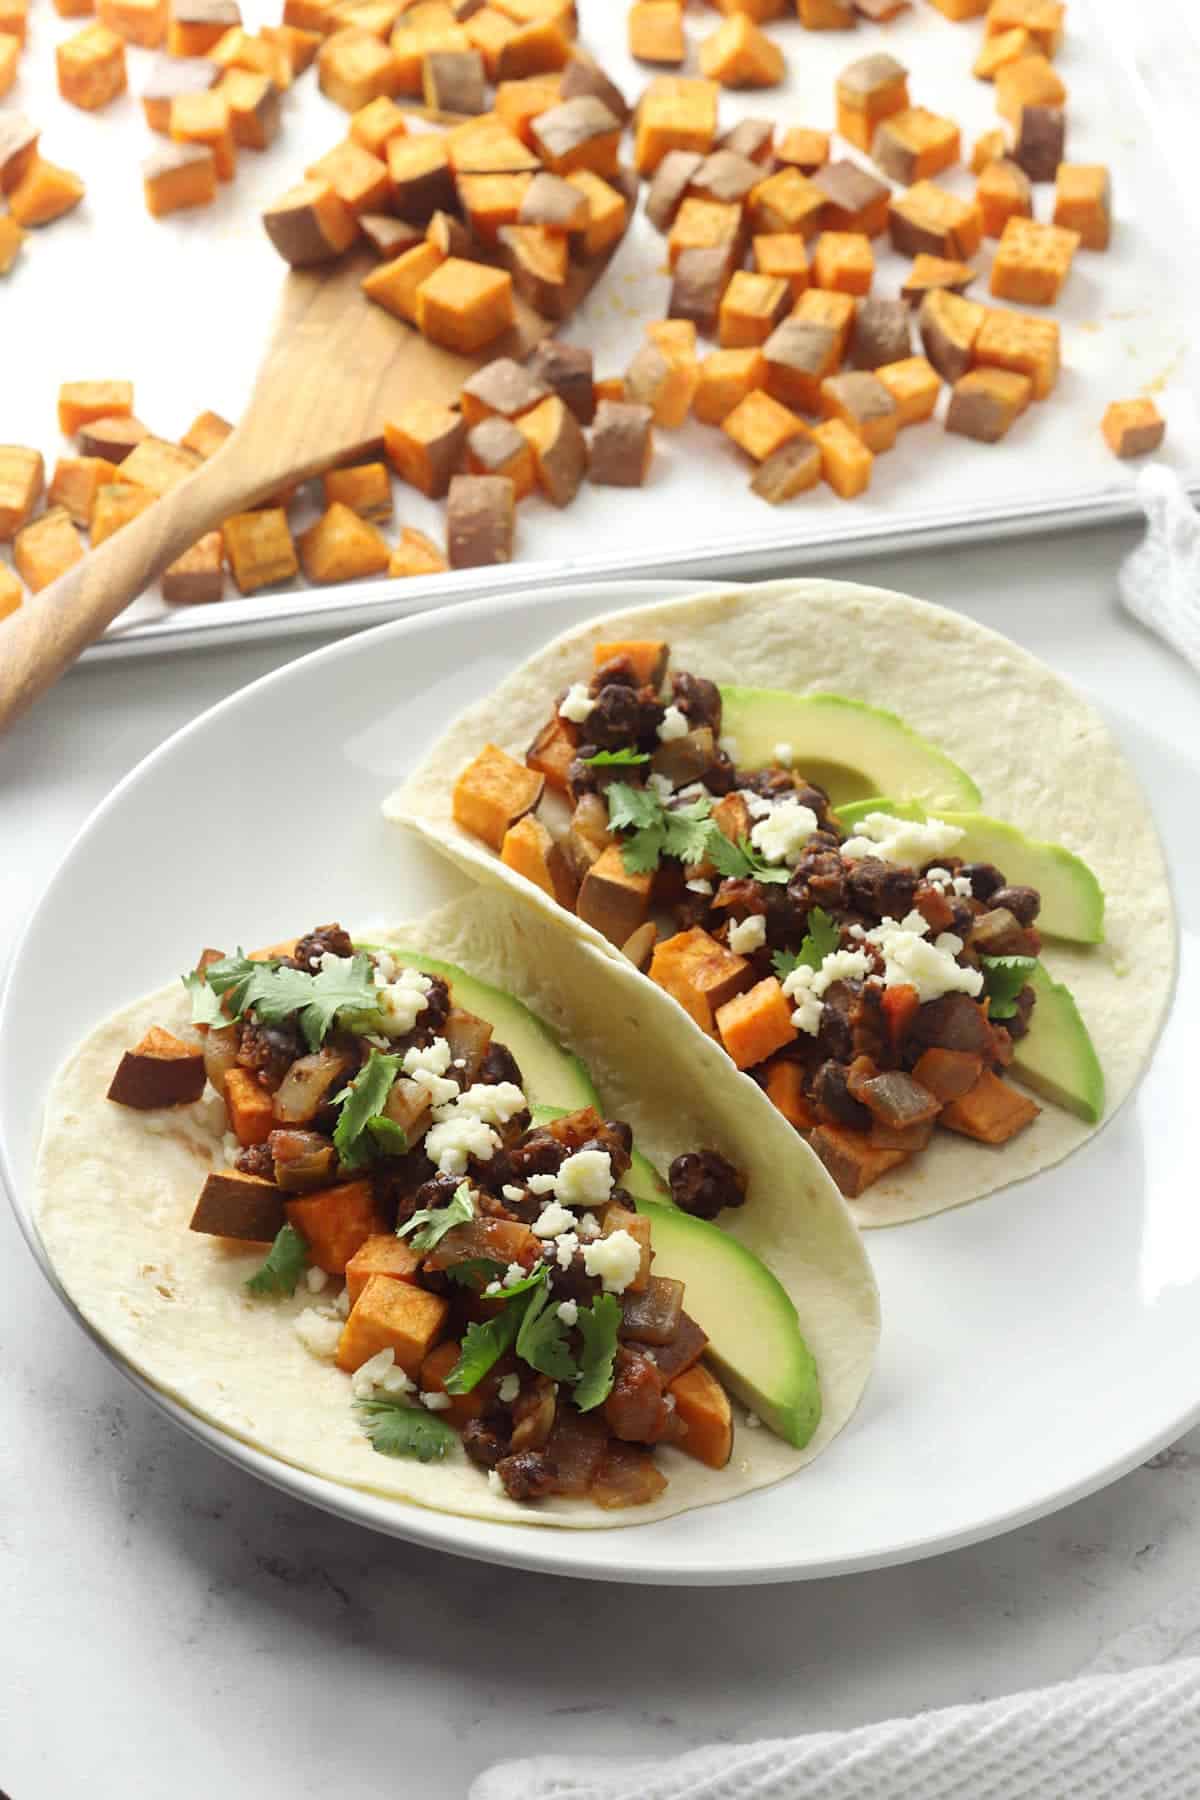 Two tacos on a white plate with a sheet pan of roasted sweet potatoes in the background.